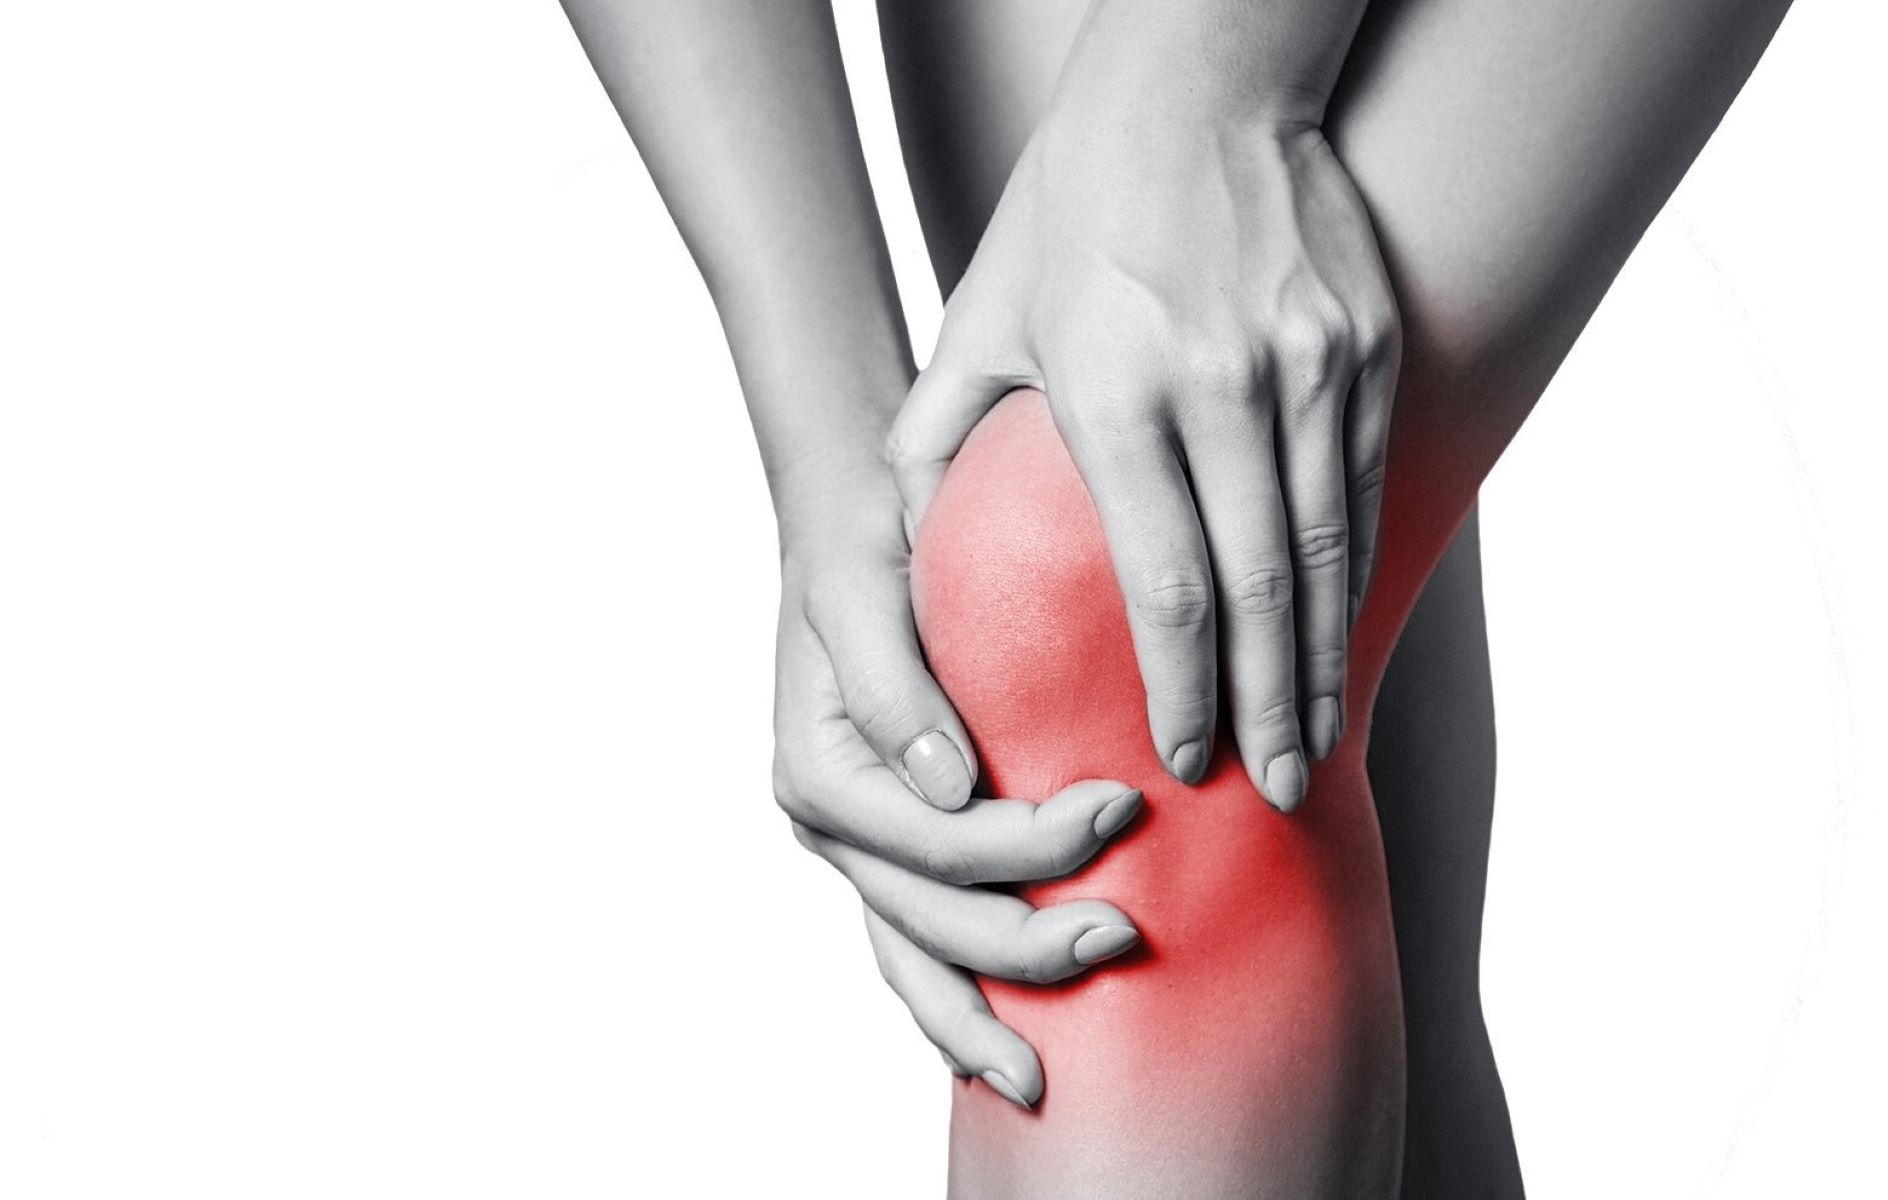 4 Common Causes Of Knee Pain After Running